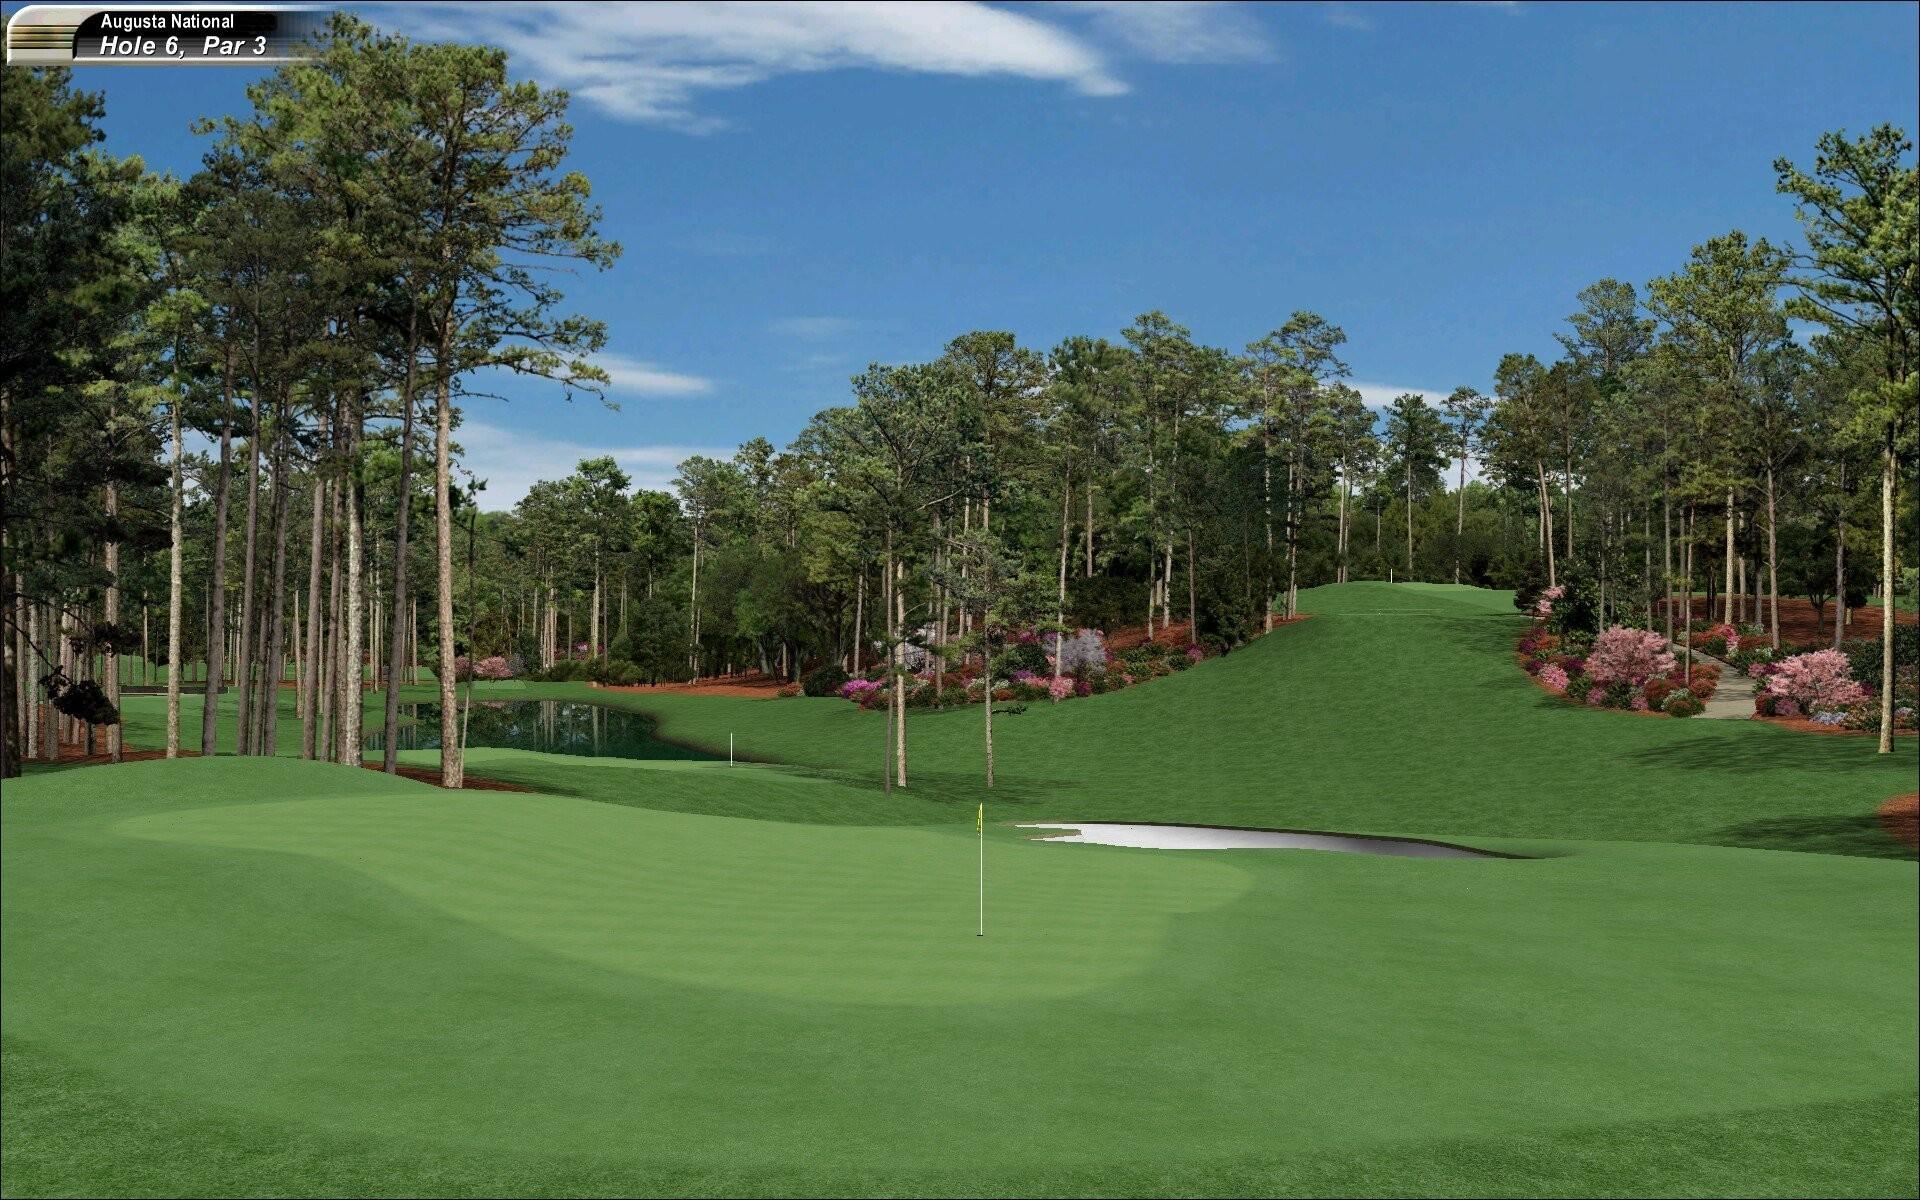 Wallpaper of Augusta National background picture